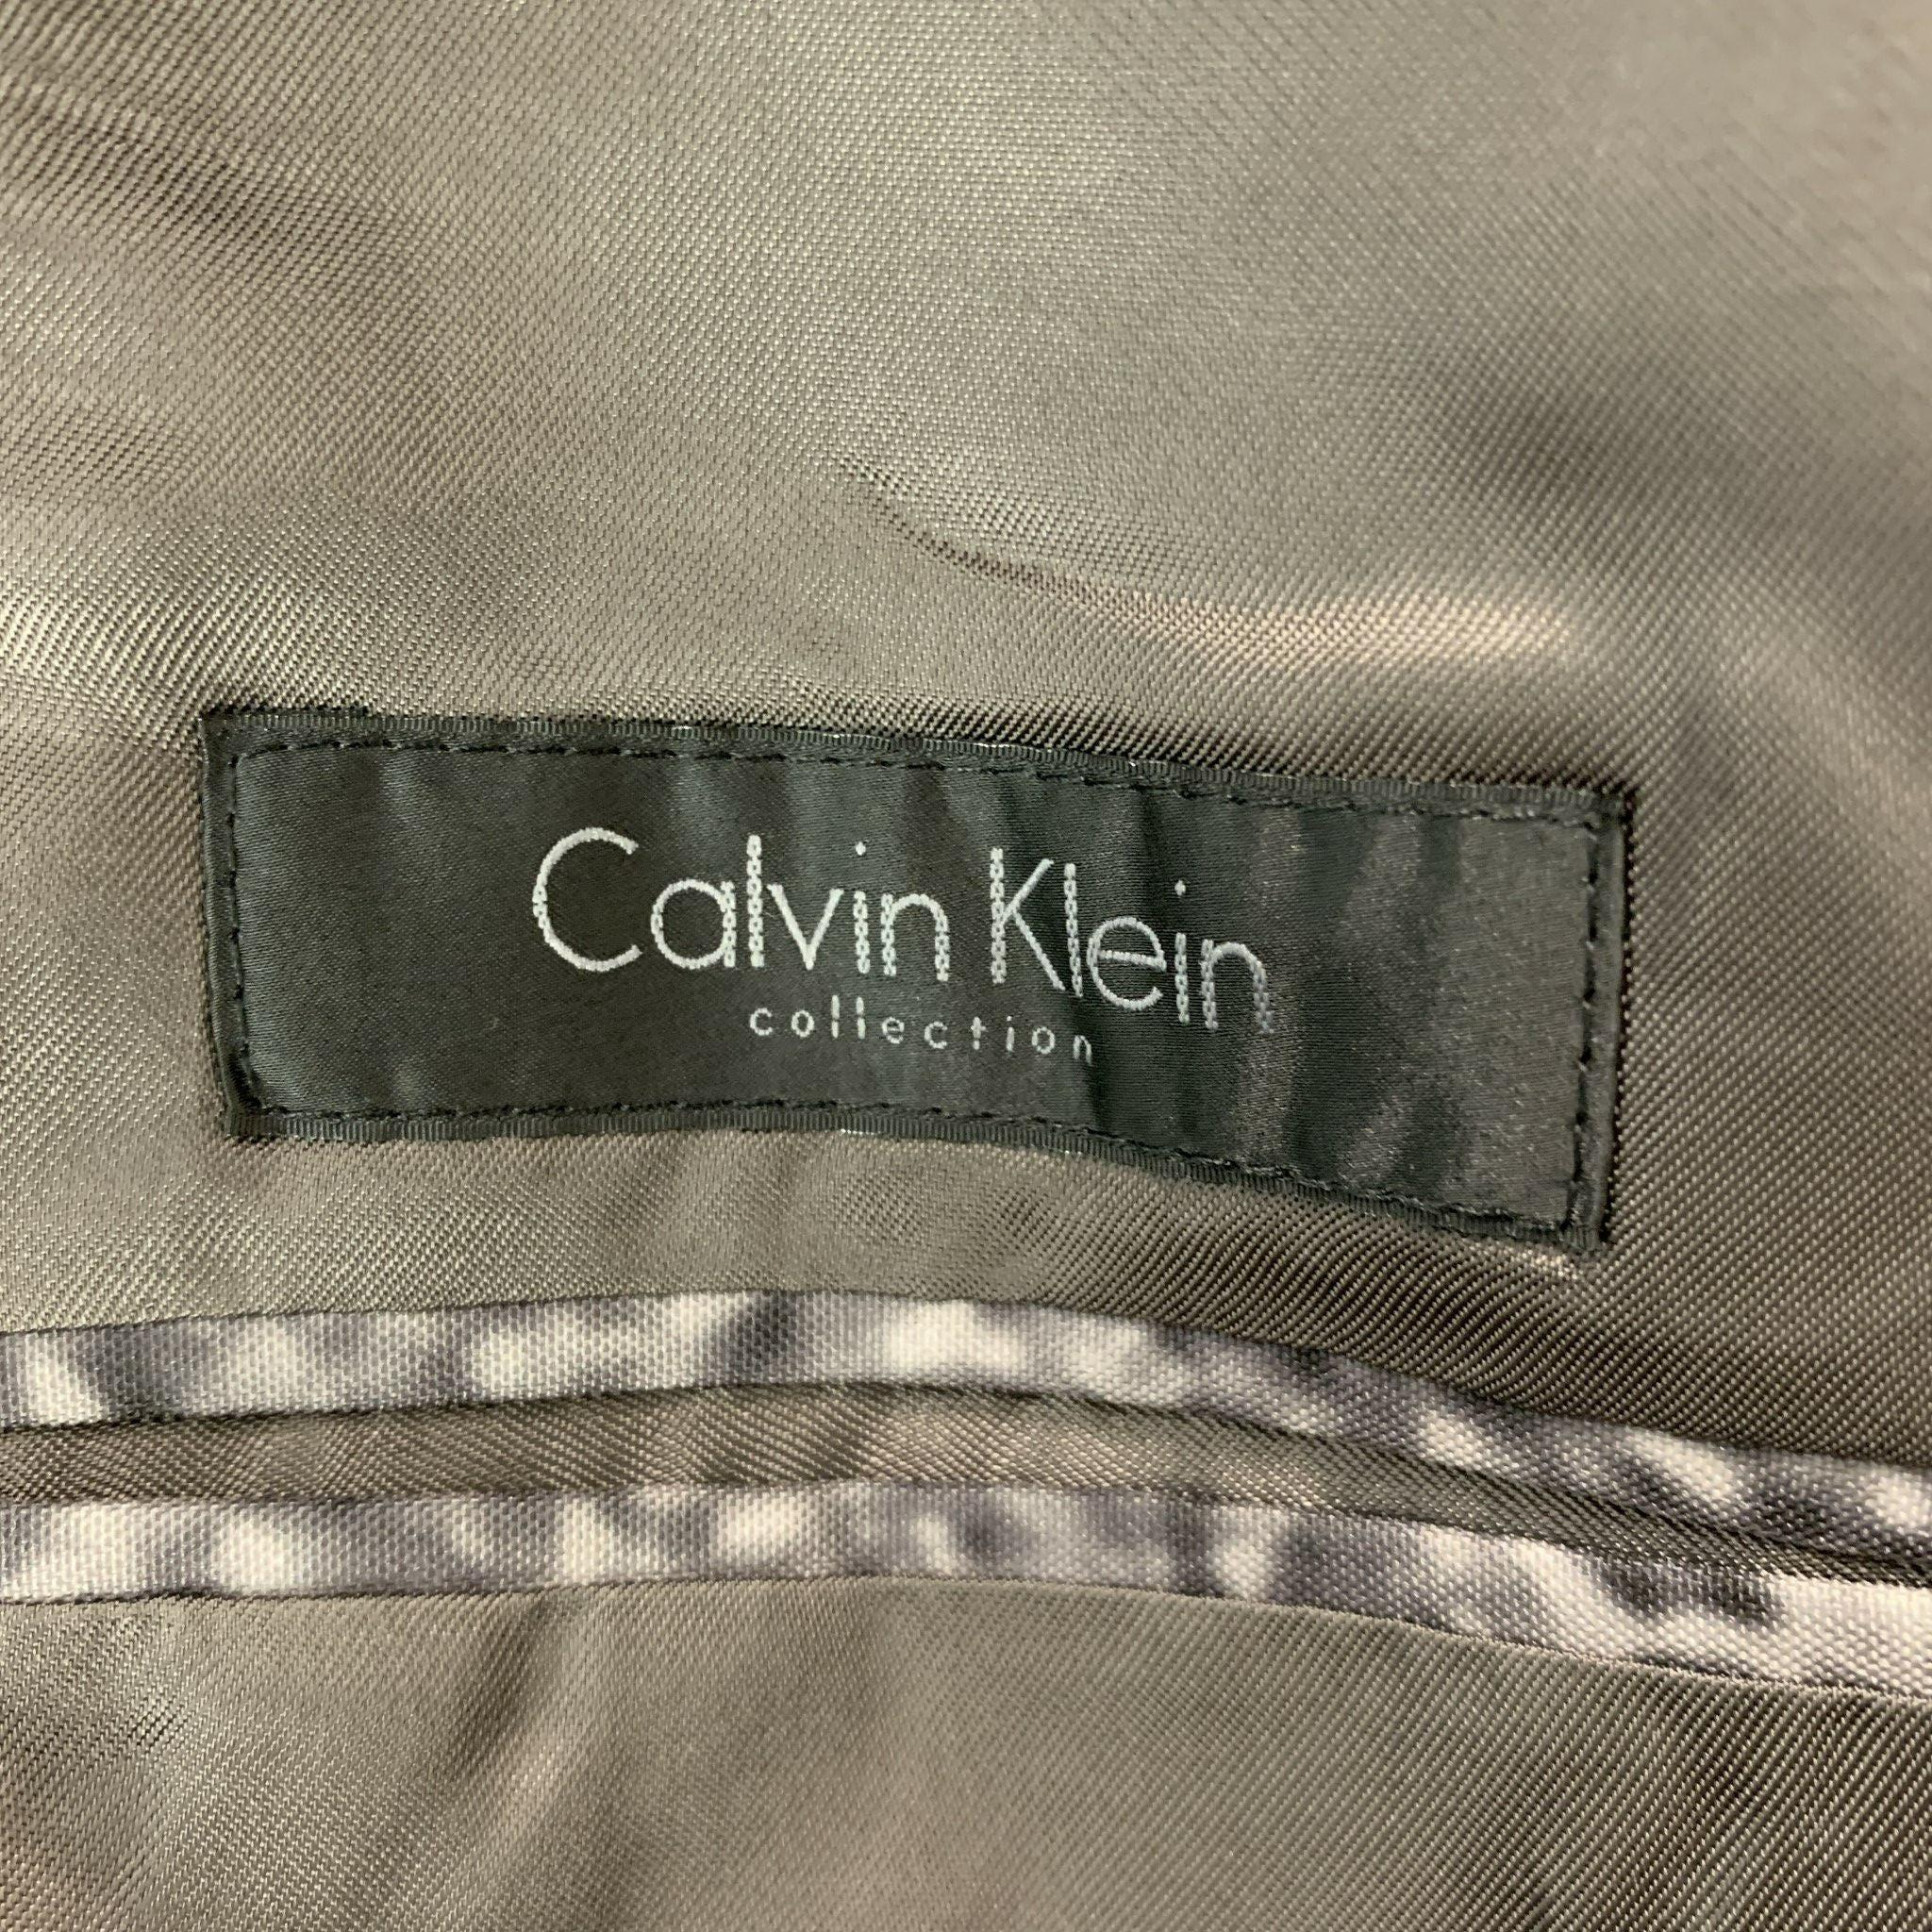 CALVIN KLEIN 'COLLECTION' Size 42 Grey Olive Abstract Polyester Sport Coat For Sale 1